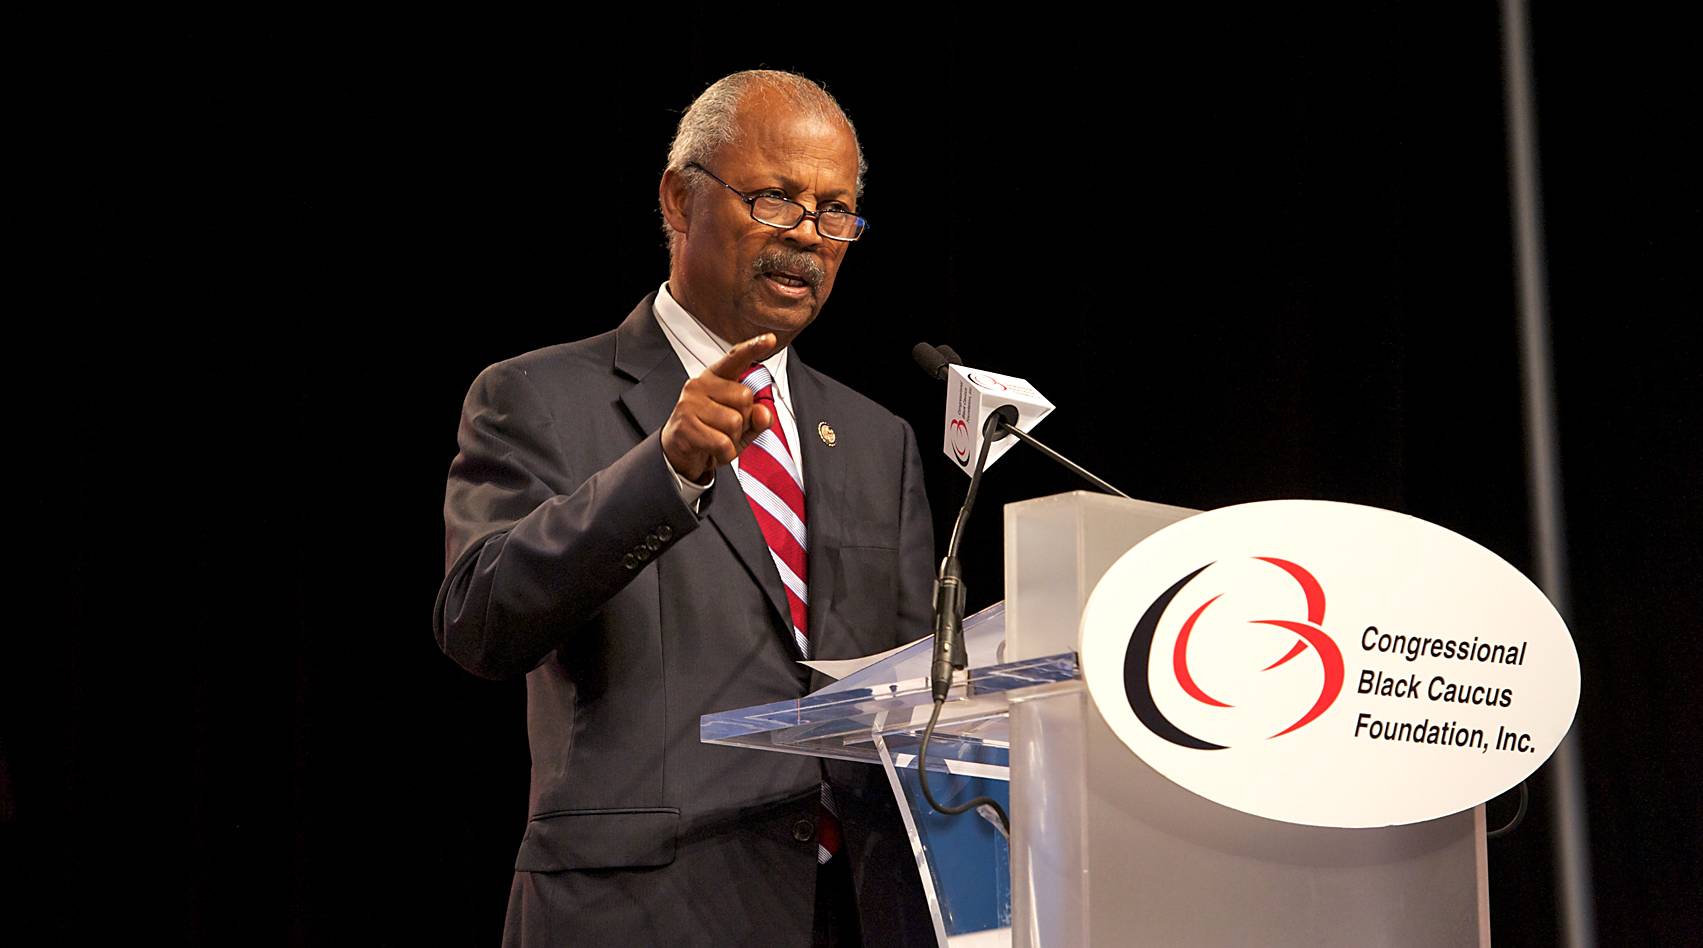 N.J. Rep. Donald Payne Has Died&nbsp; - Rep. Donald Payne, New Jersey’s first African-American congressman and a former Congressional Black Caucus chairman, died Tuesday. He was 77.(Photo: Earl Gibson III/WireImage/Getty Images)